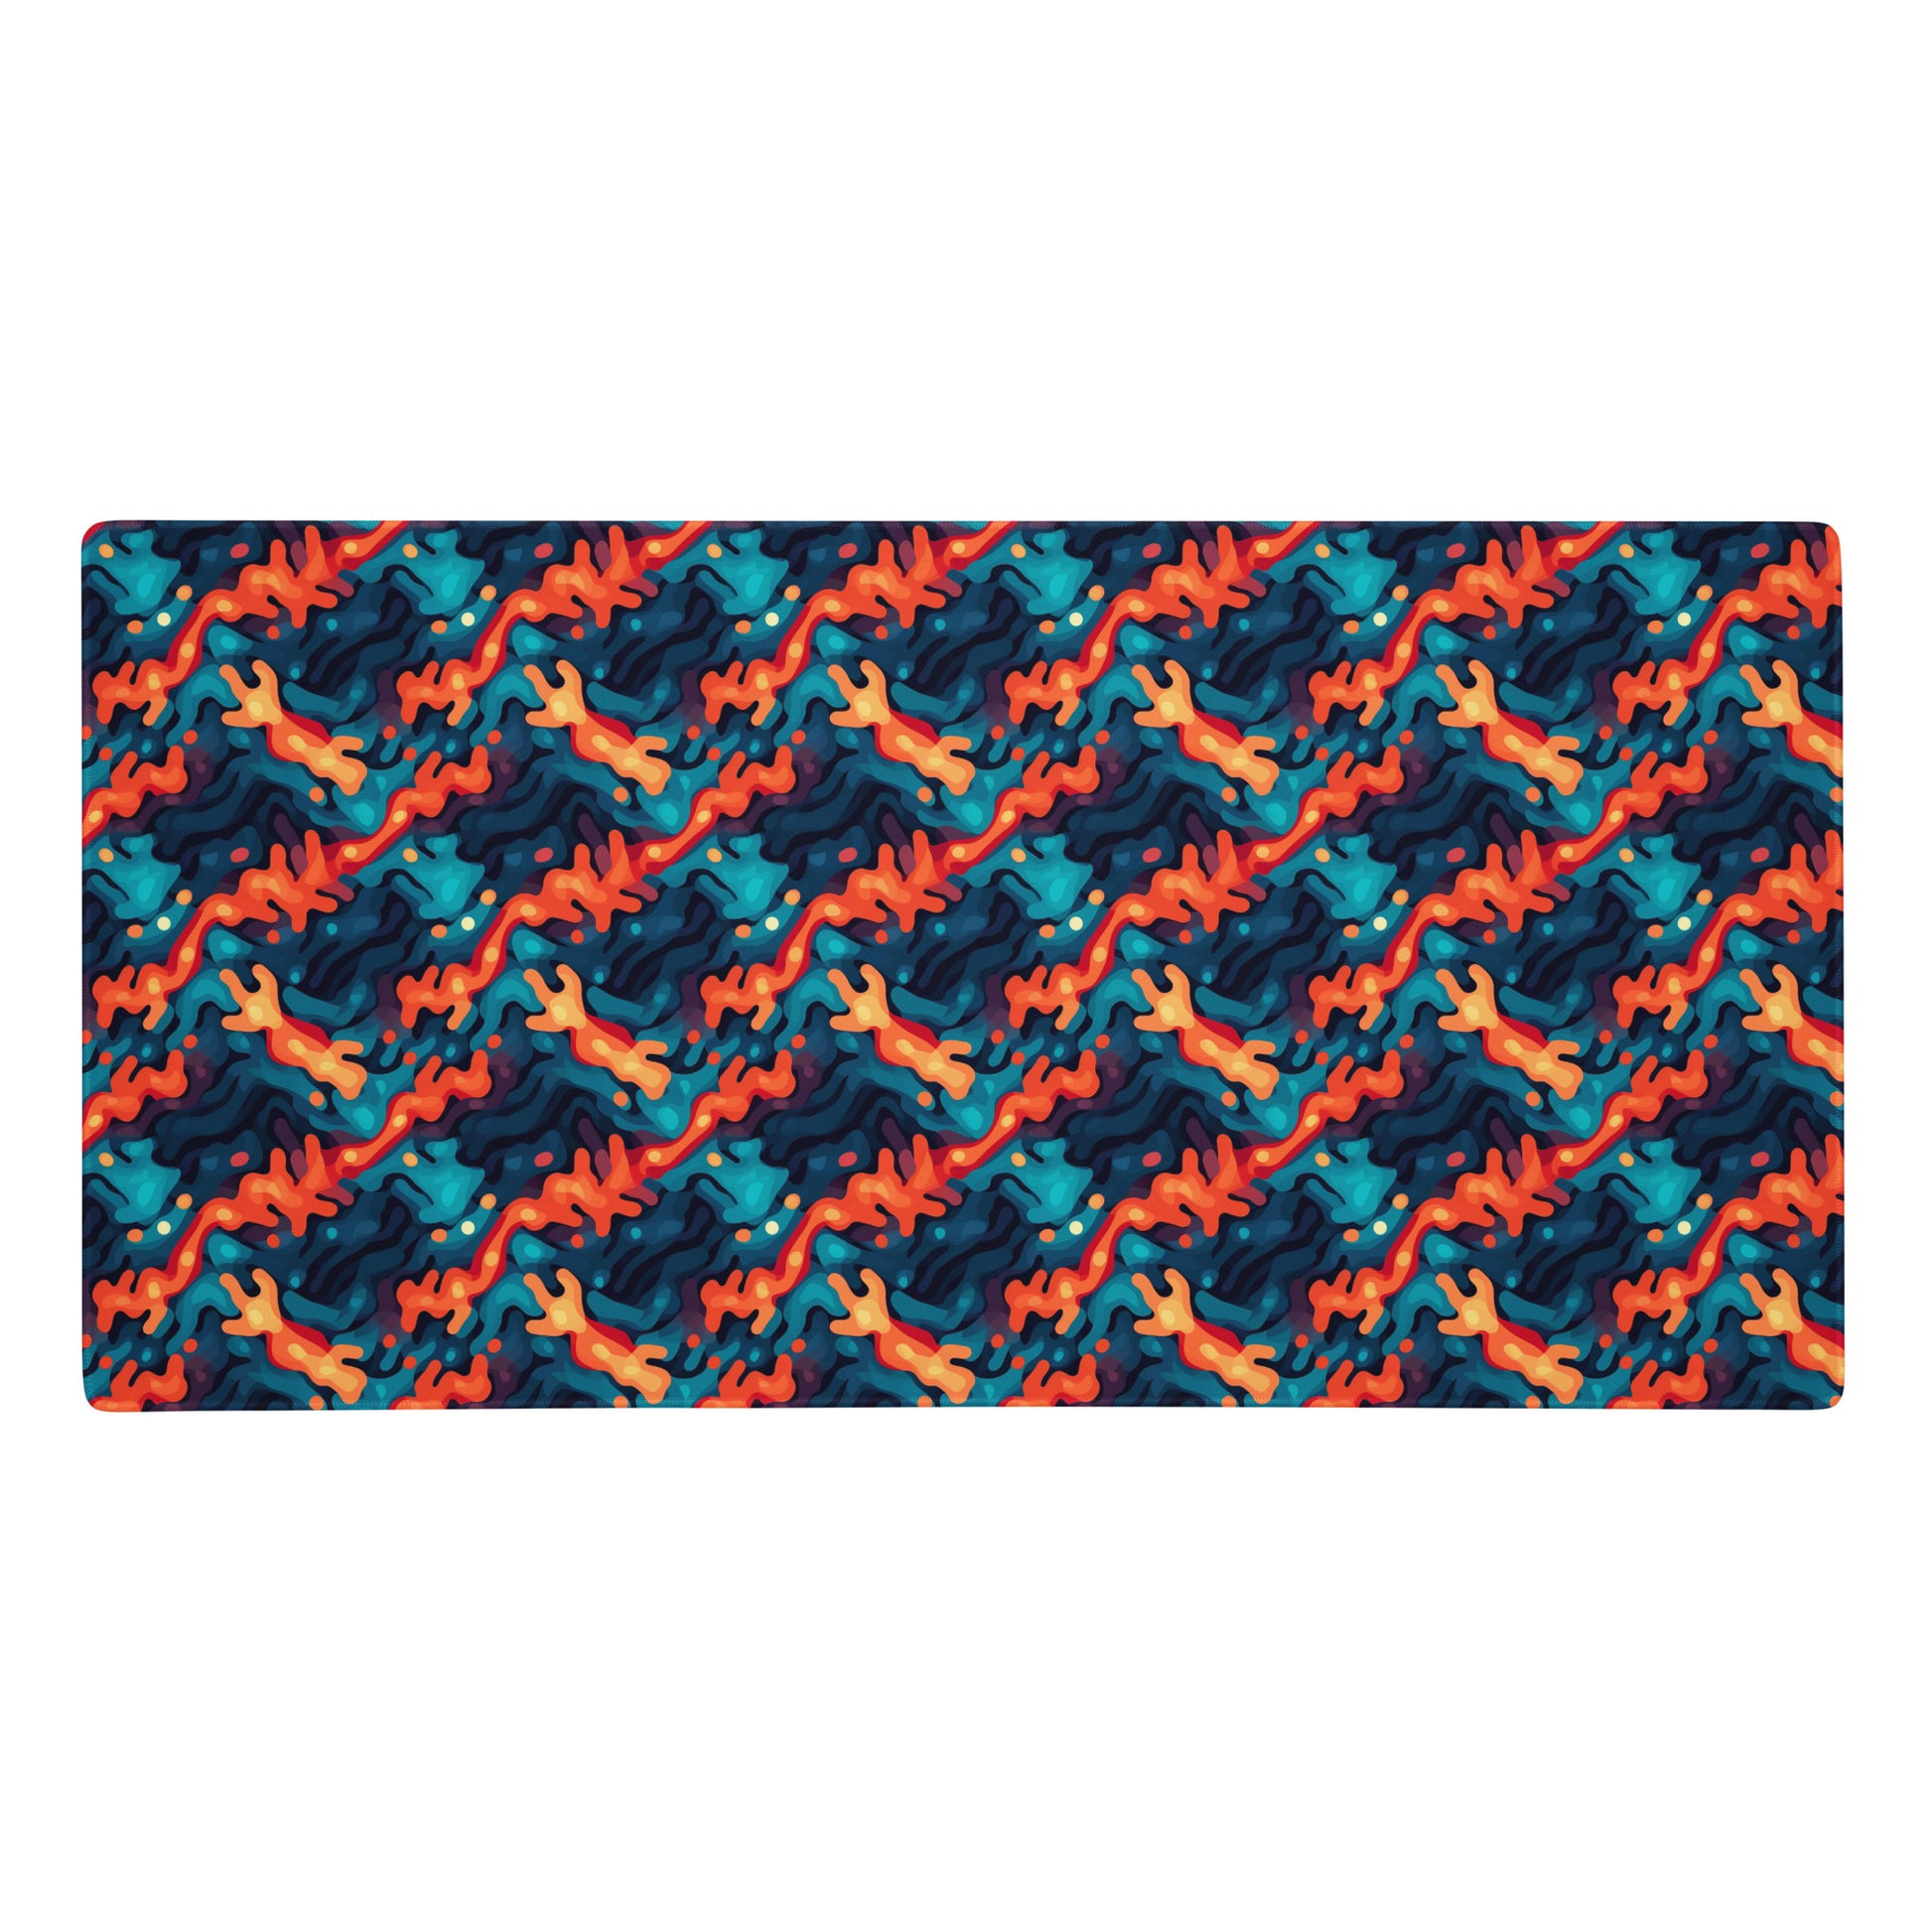 A 36" x 18" desk pad with a wavy woven pattern on it. Red and Blue in color.